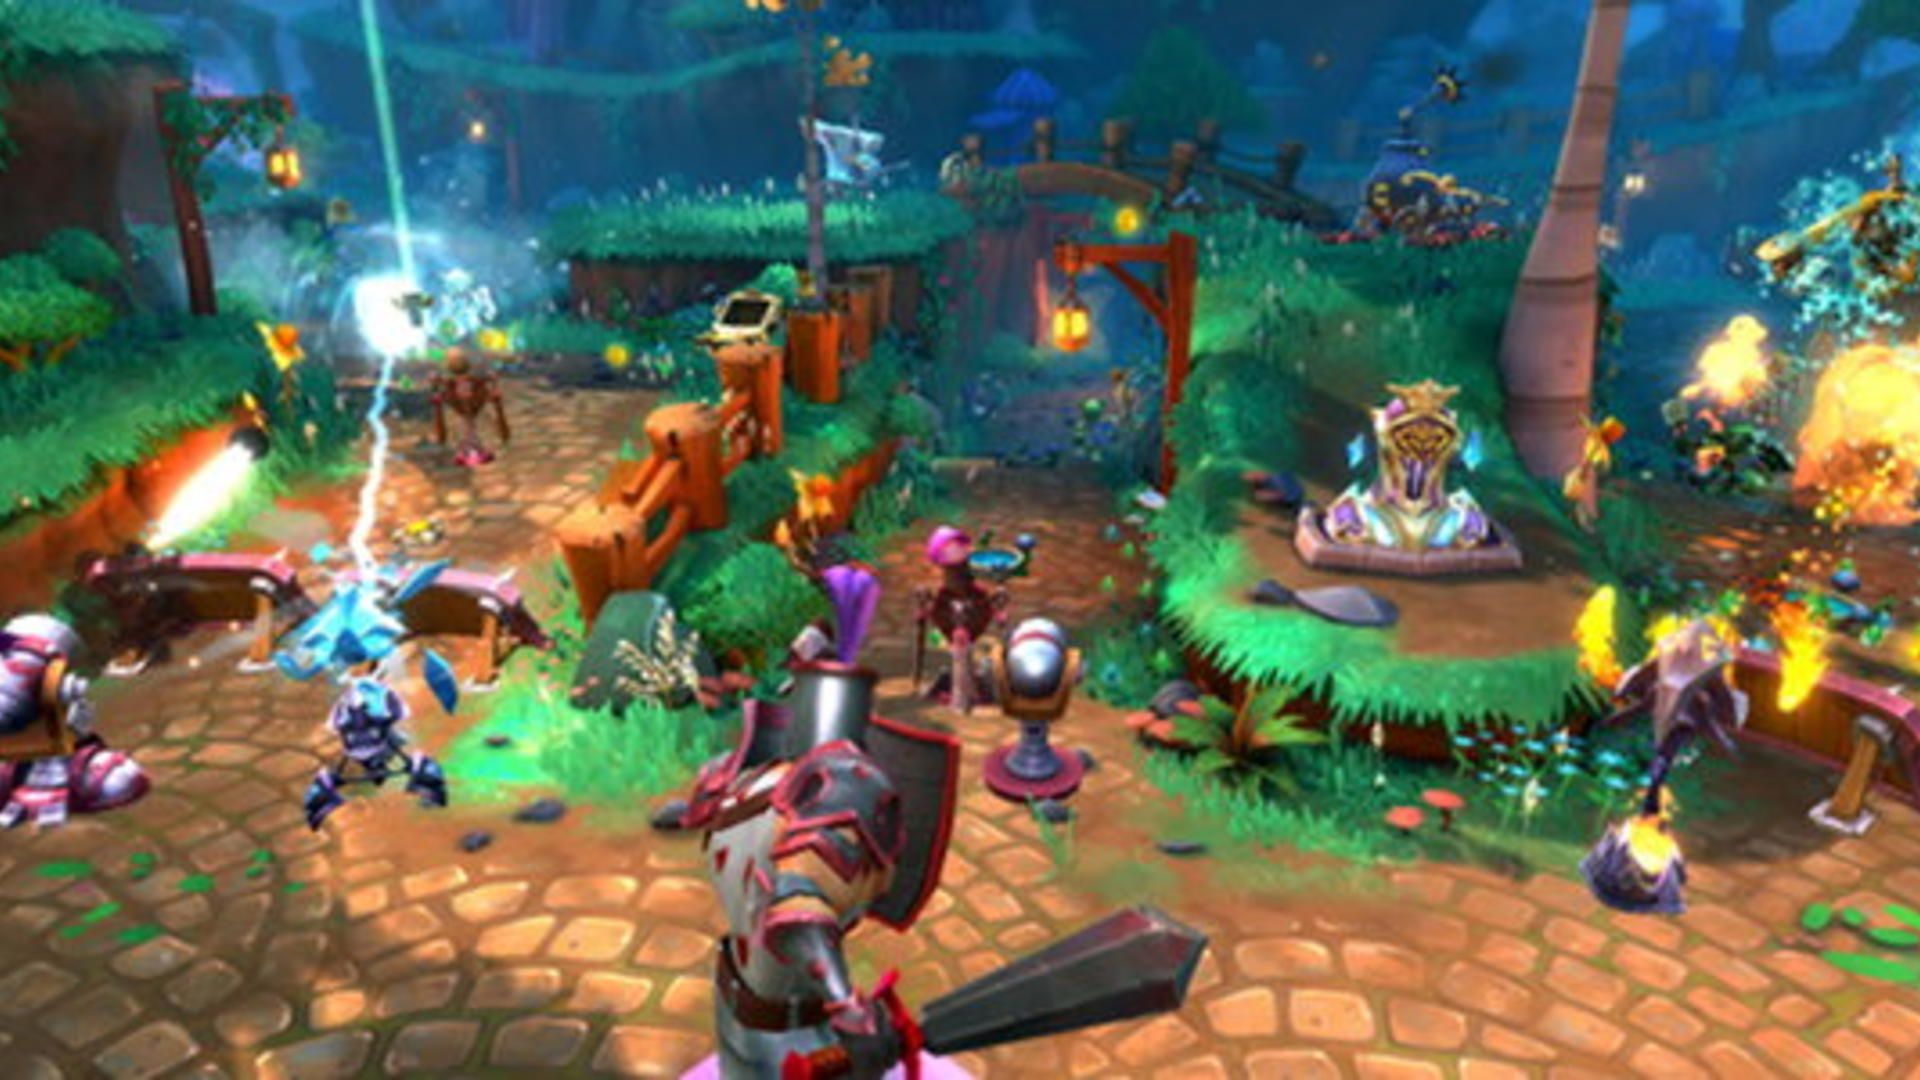 Dungeon Defenders 2 launches out of early access. Rock Paper Shotgun